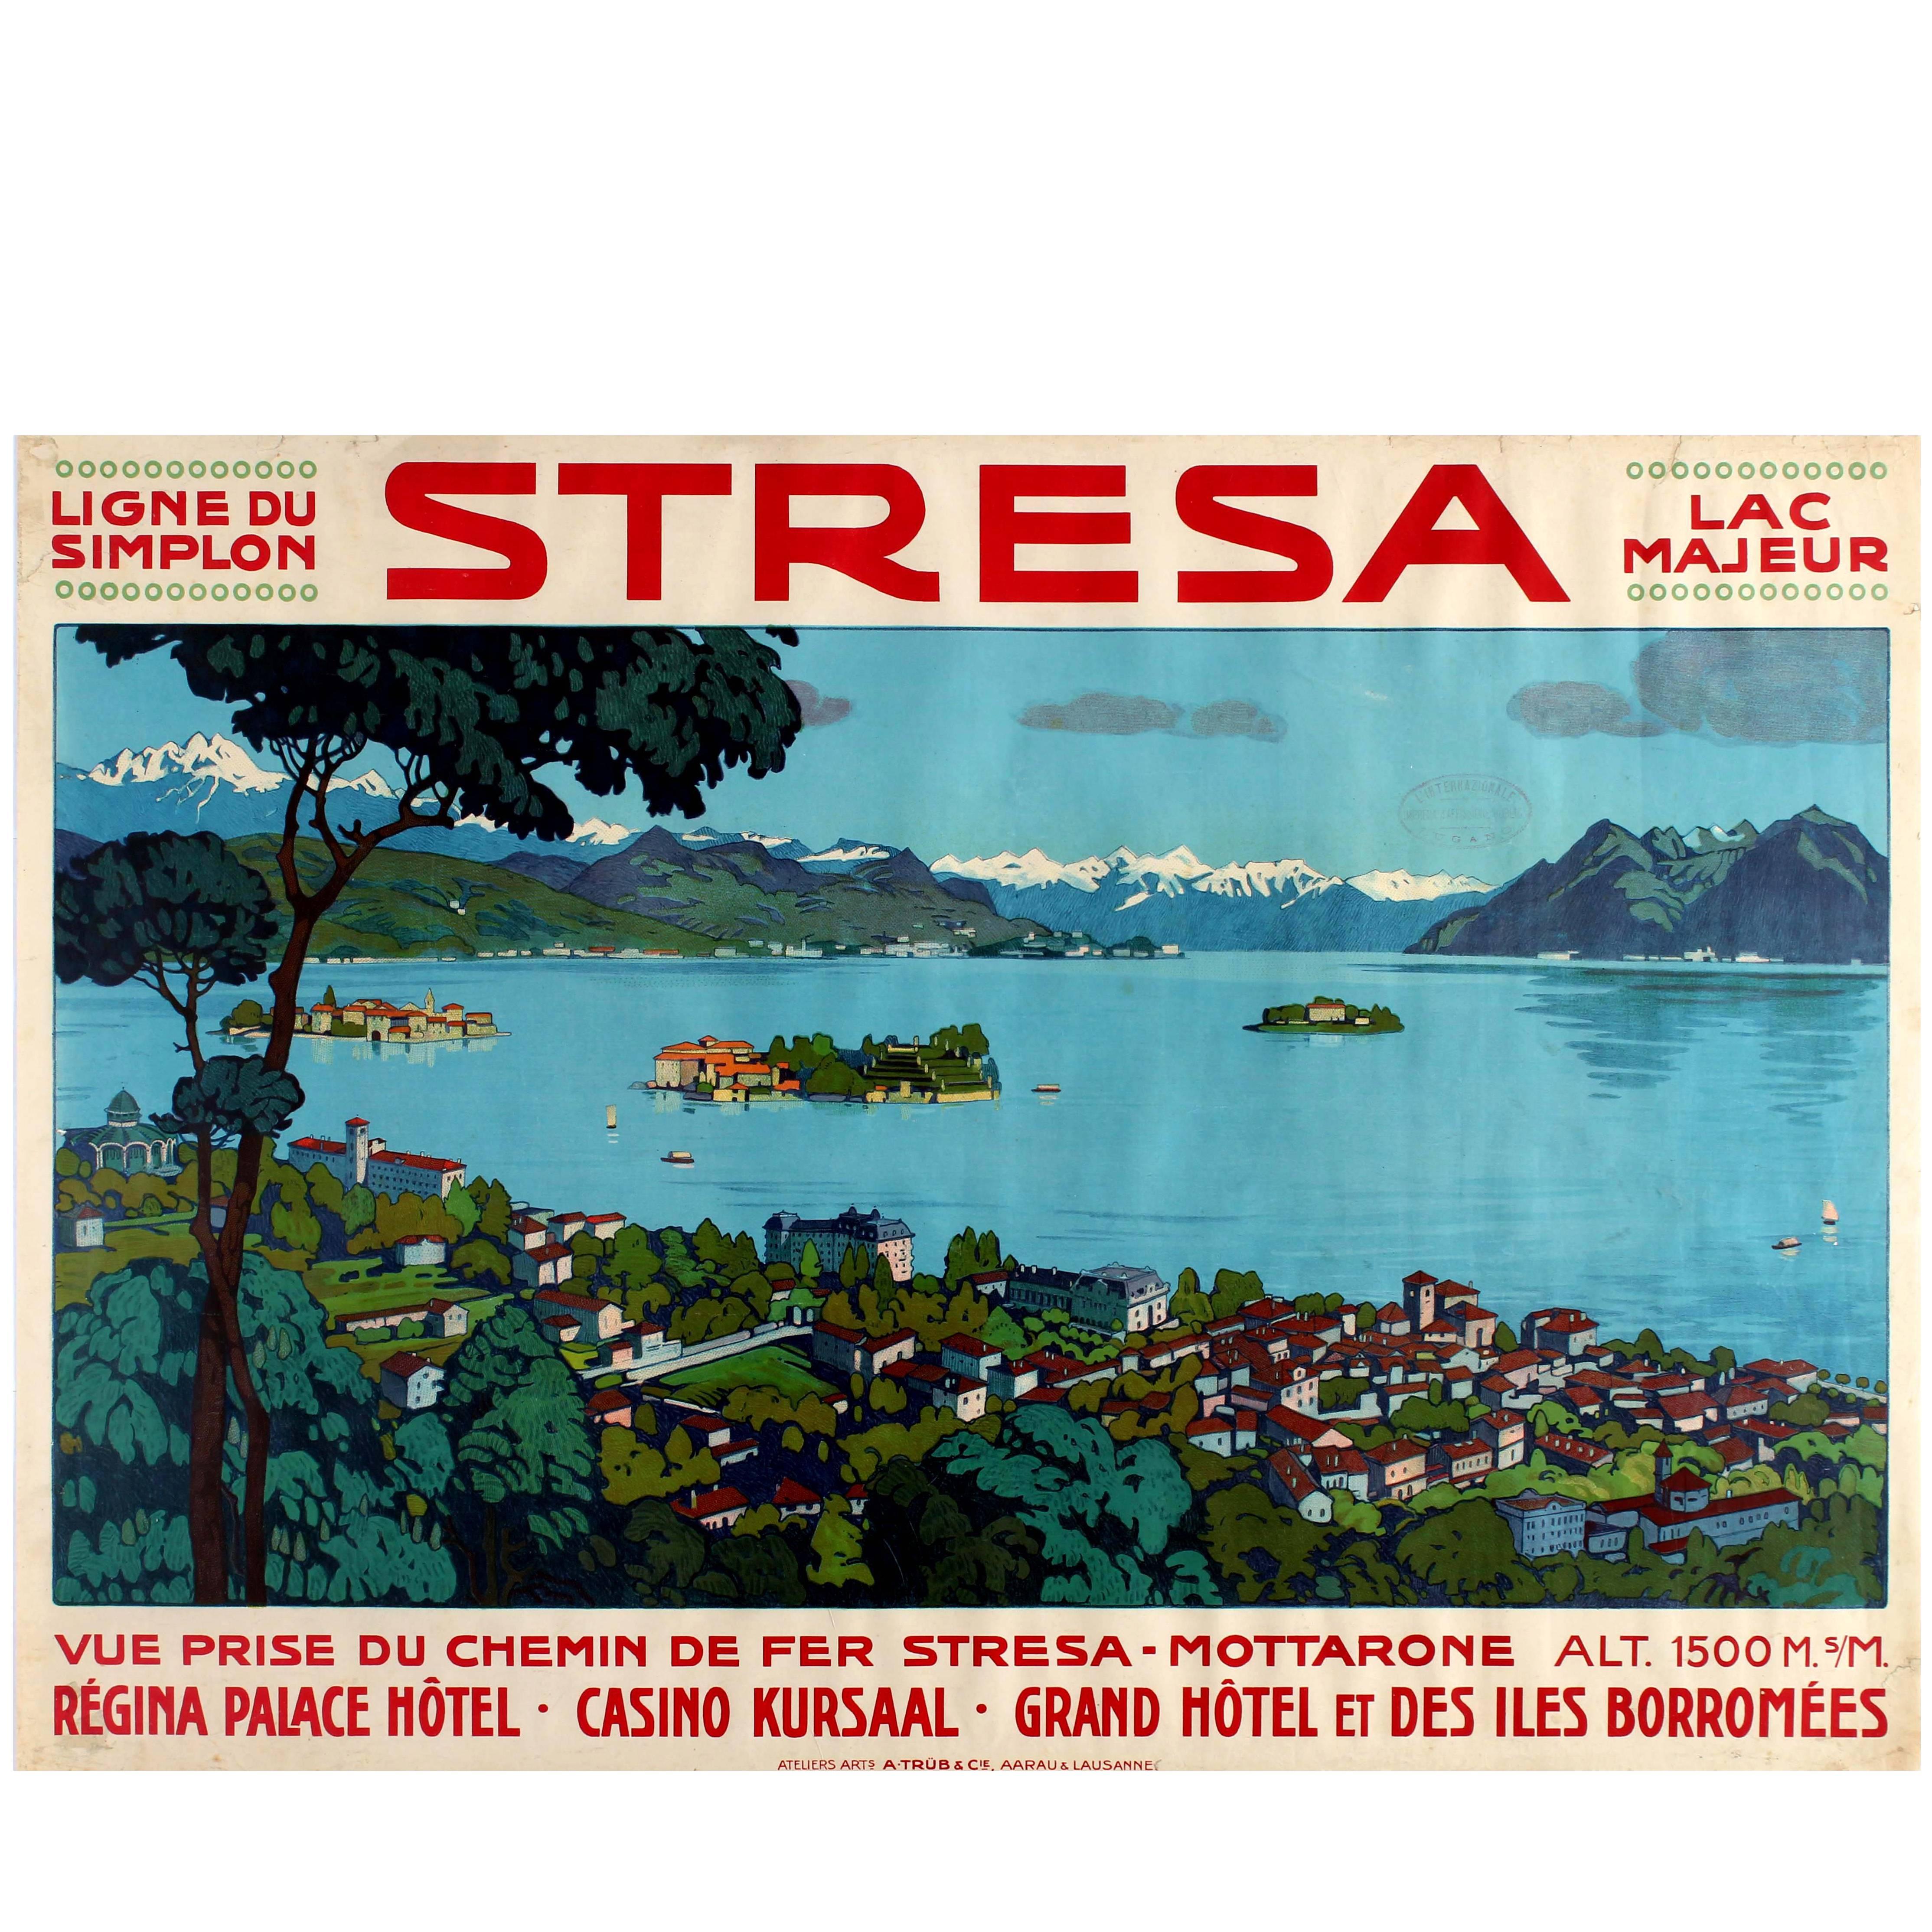 Original Early Simplon Railway Travel Poster for Stresa on Lake Maggiore Italy